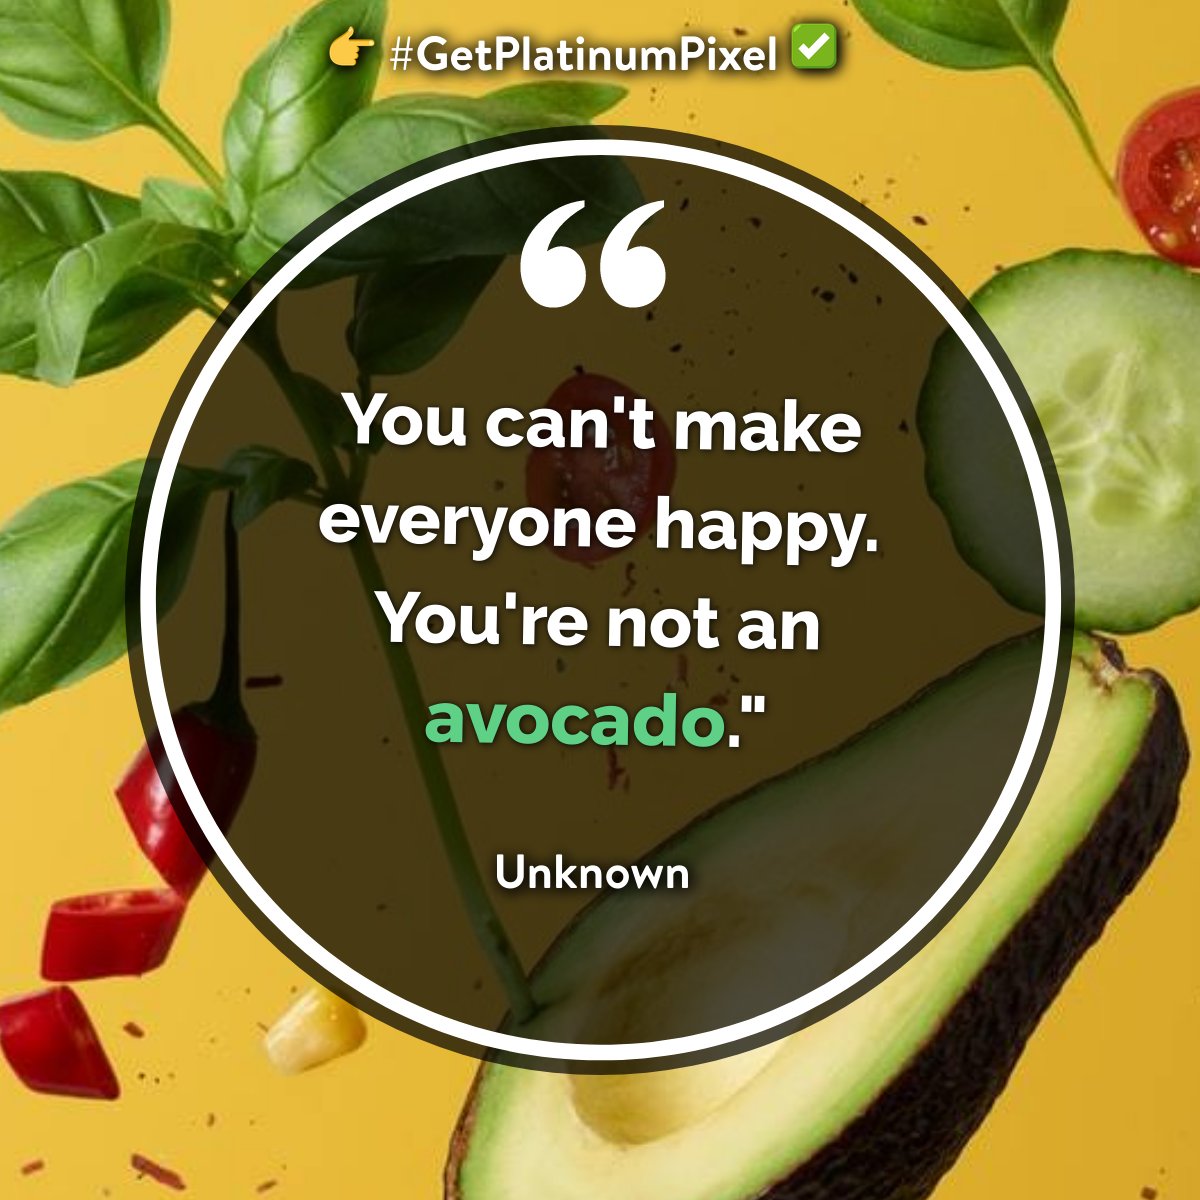 👉 #GetPlatinumPixel ✅ Happy Halfway there #Wednesday 😉
_______
If you're ready to level up like an #Avocado 👉 #GetPlatinumPixel
_______
 #EntrepeneurMagazine #WomenEntrepeneur #BestReverseMortgage #NanaimoRealestate